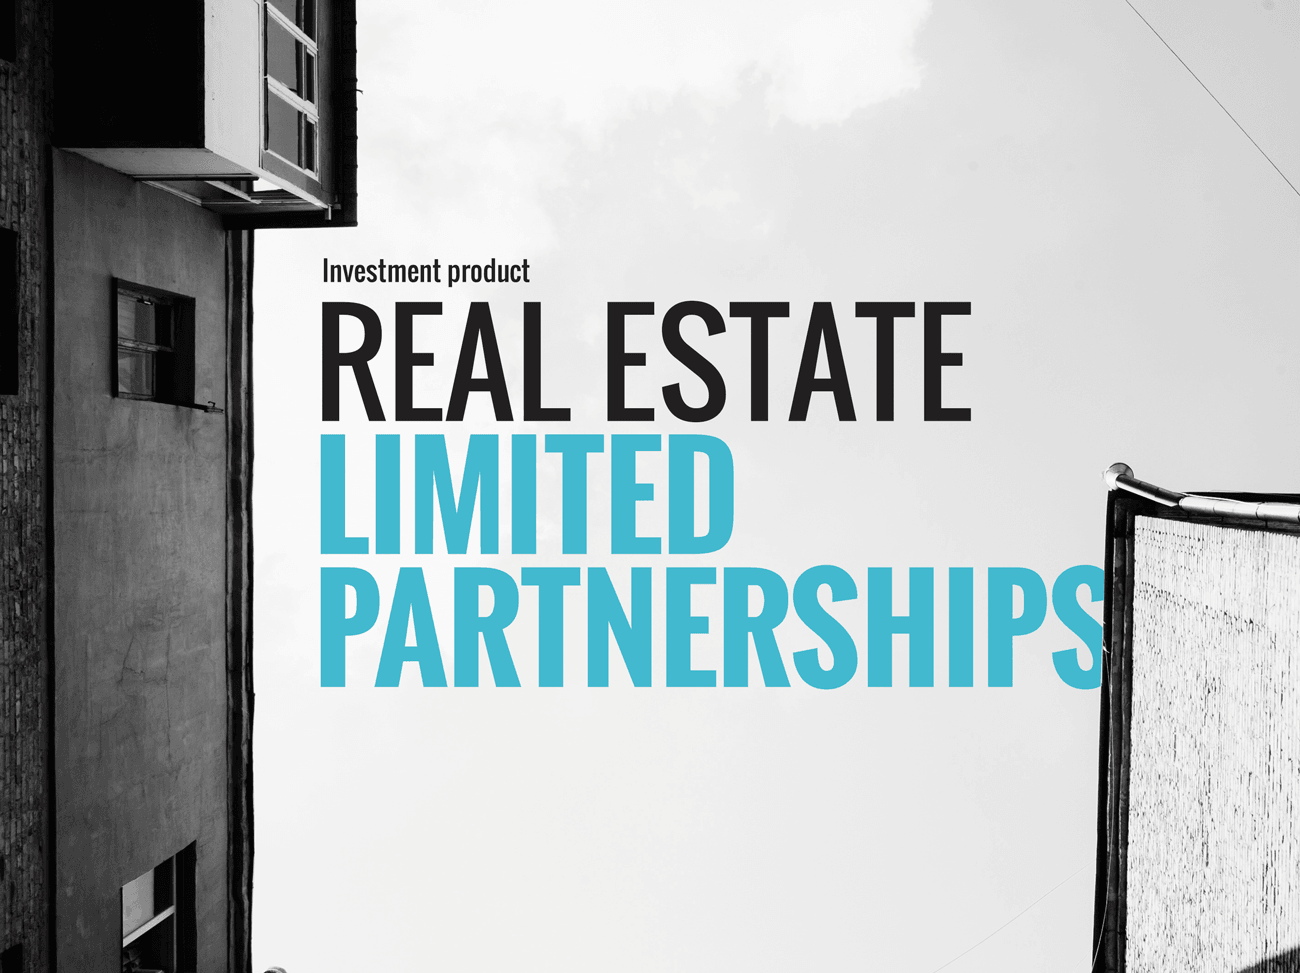 Investment product: Real estate limited partnerships